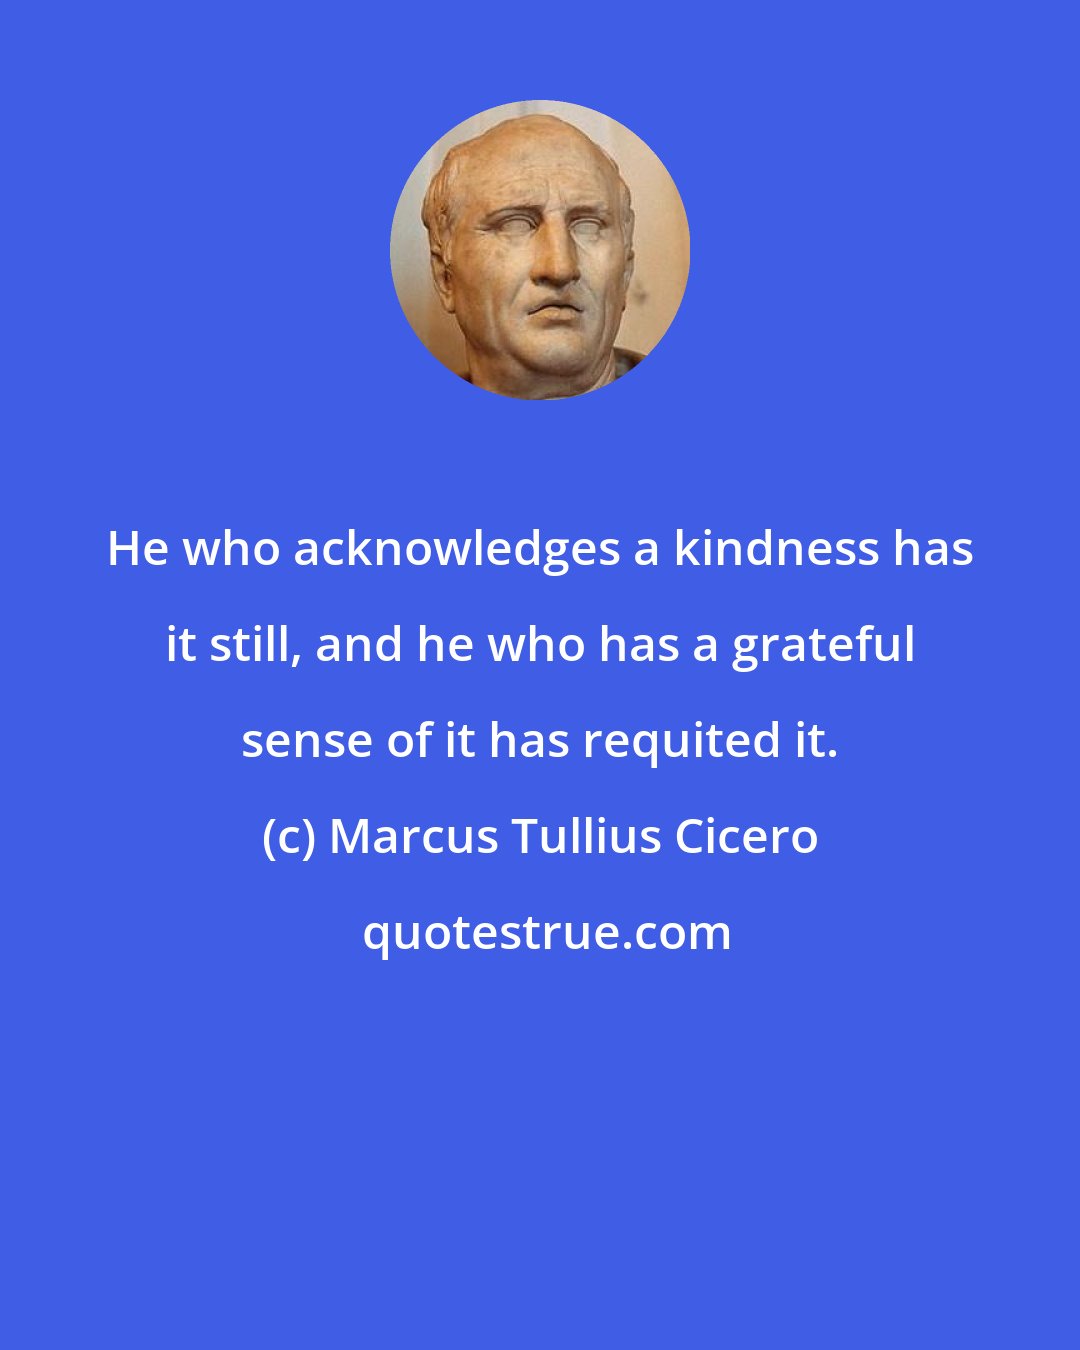 Marcus Tullius Cicero: He who acknowledges a kindness has it still, and he who has a grateful sense of it has requited it.